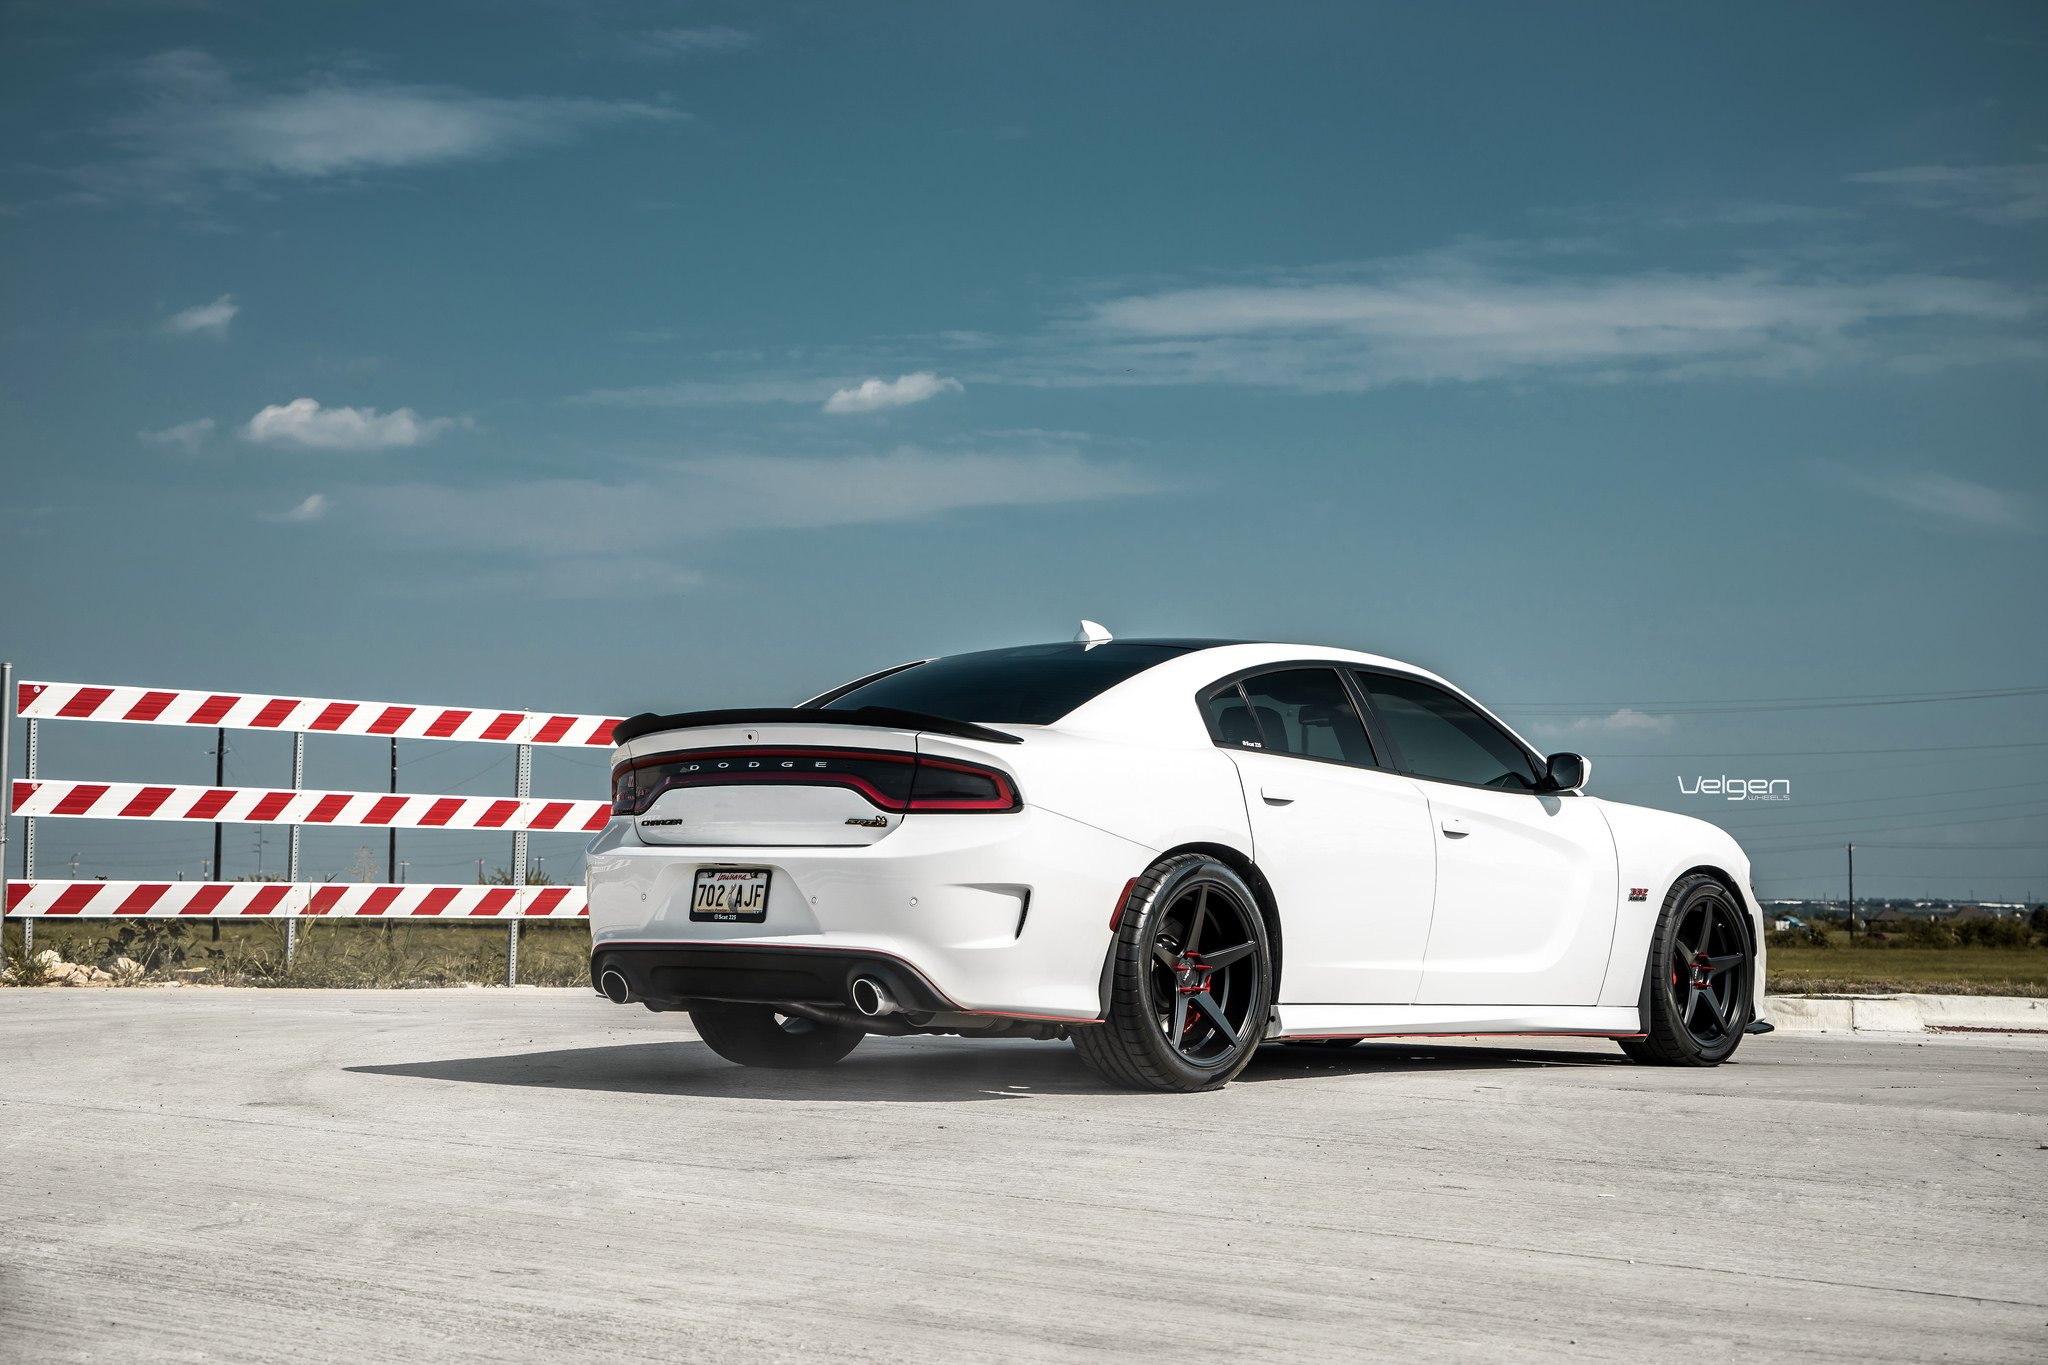 Aftermarket Rear Bumper on White Dodge Charger - Photo by Velgen